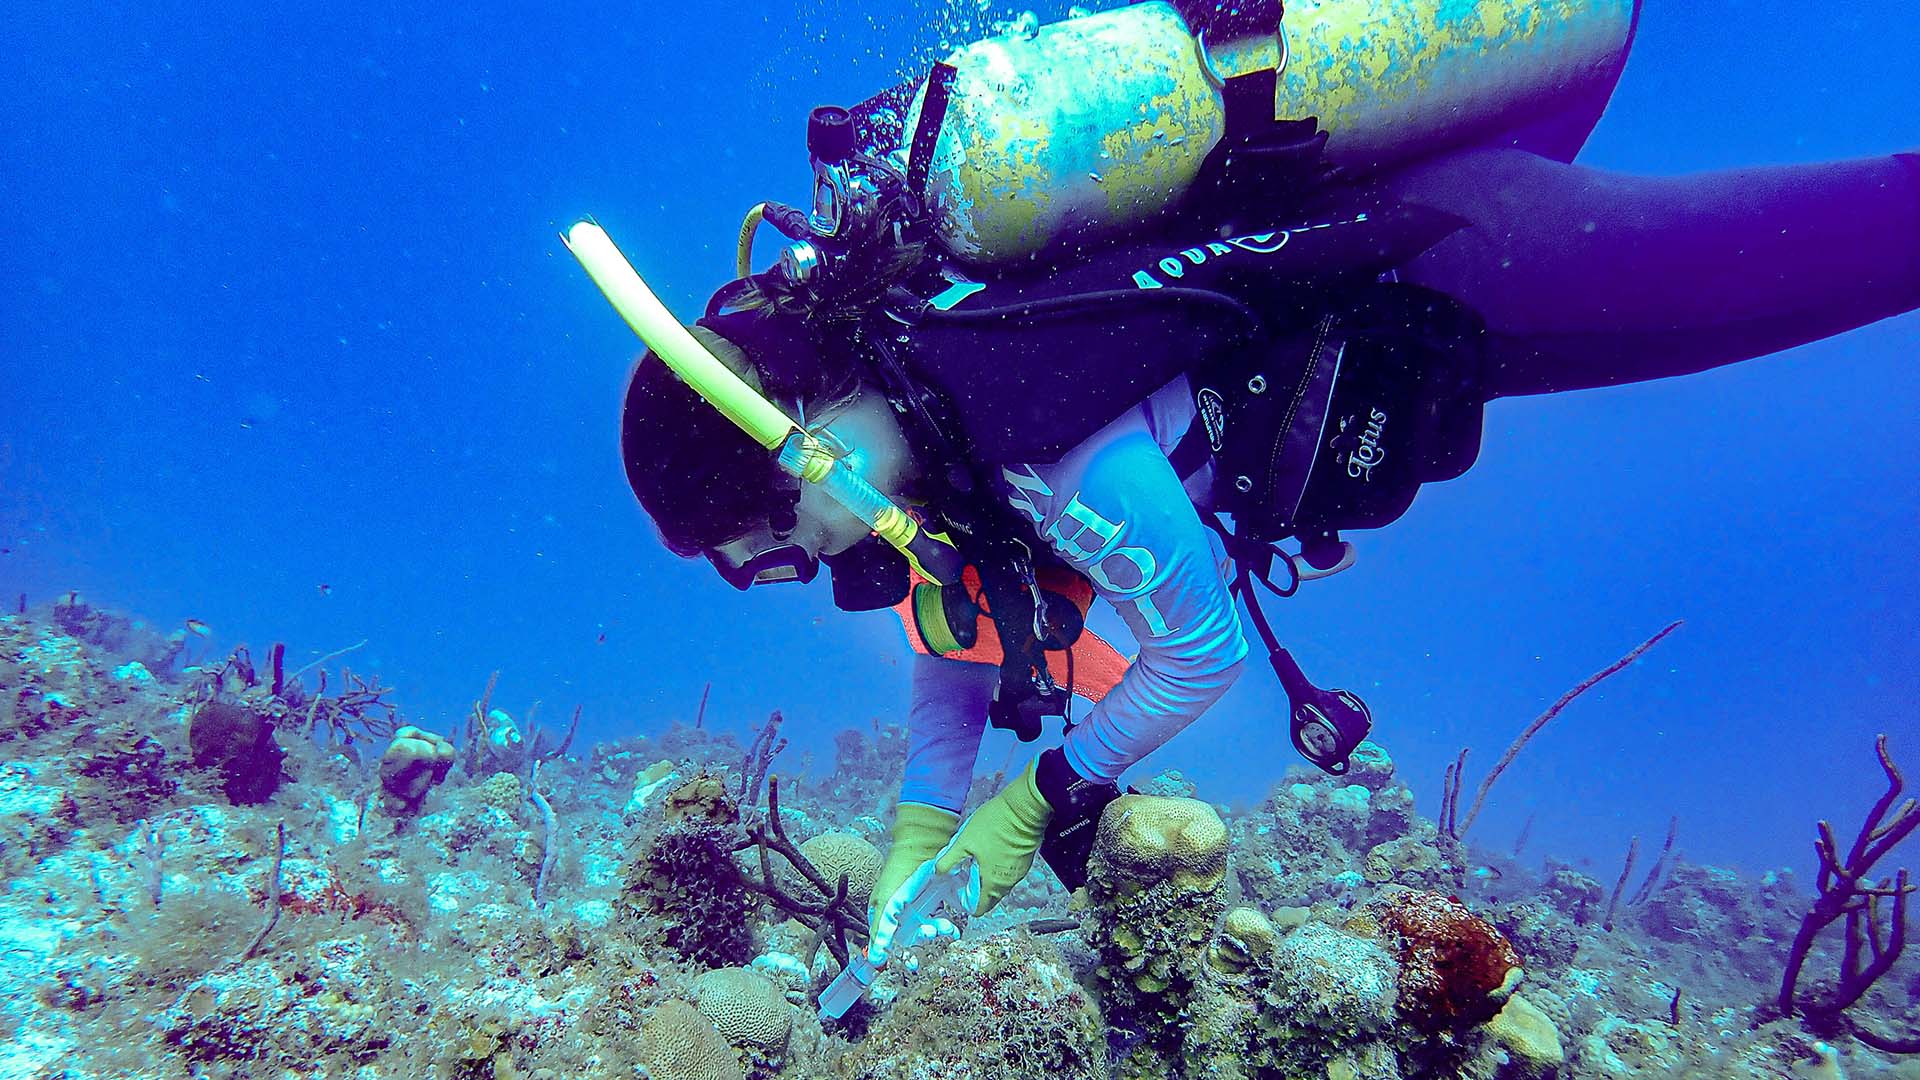 Cynthia Becker takes a water sample over a diseased coral near St. Thomas in the U.S. Virgin Islands in 2020. (Photo courtesy of Amy Apprill, © Woods Hole Oceanographic Institution)